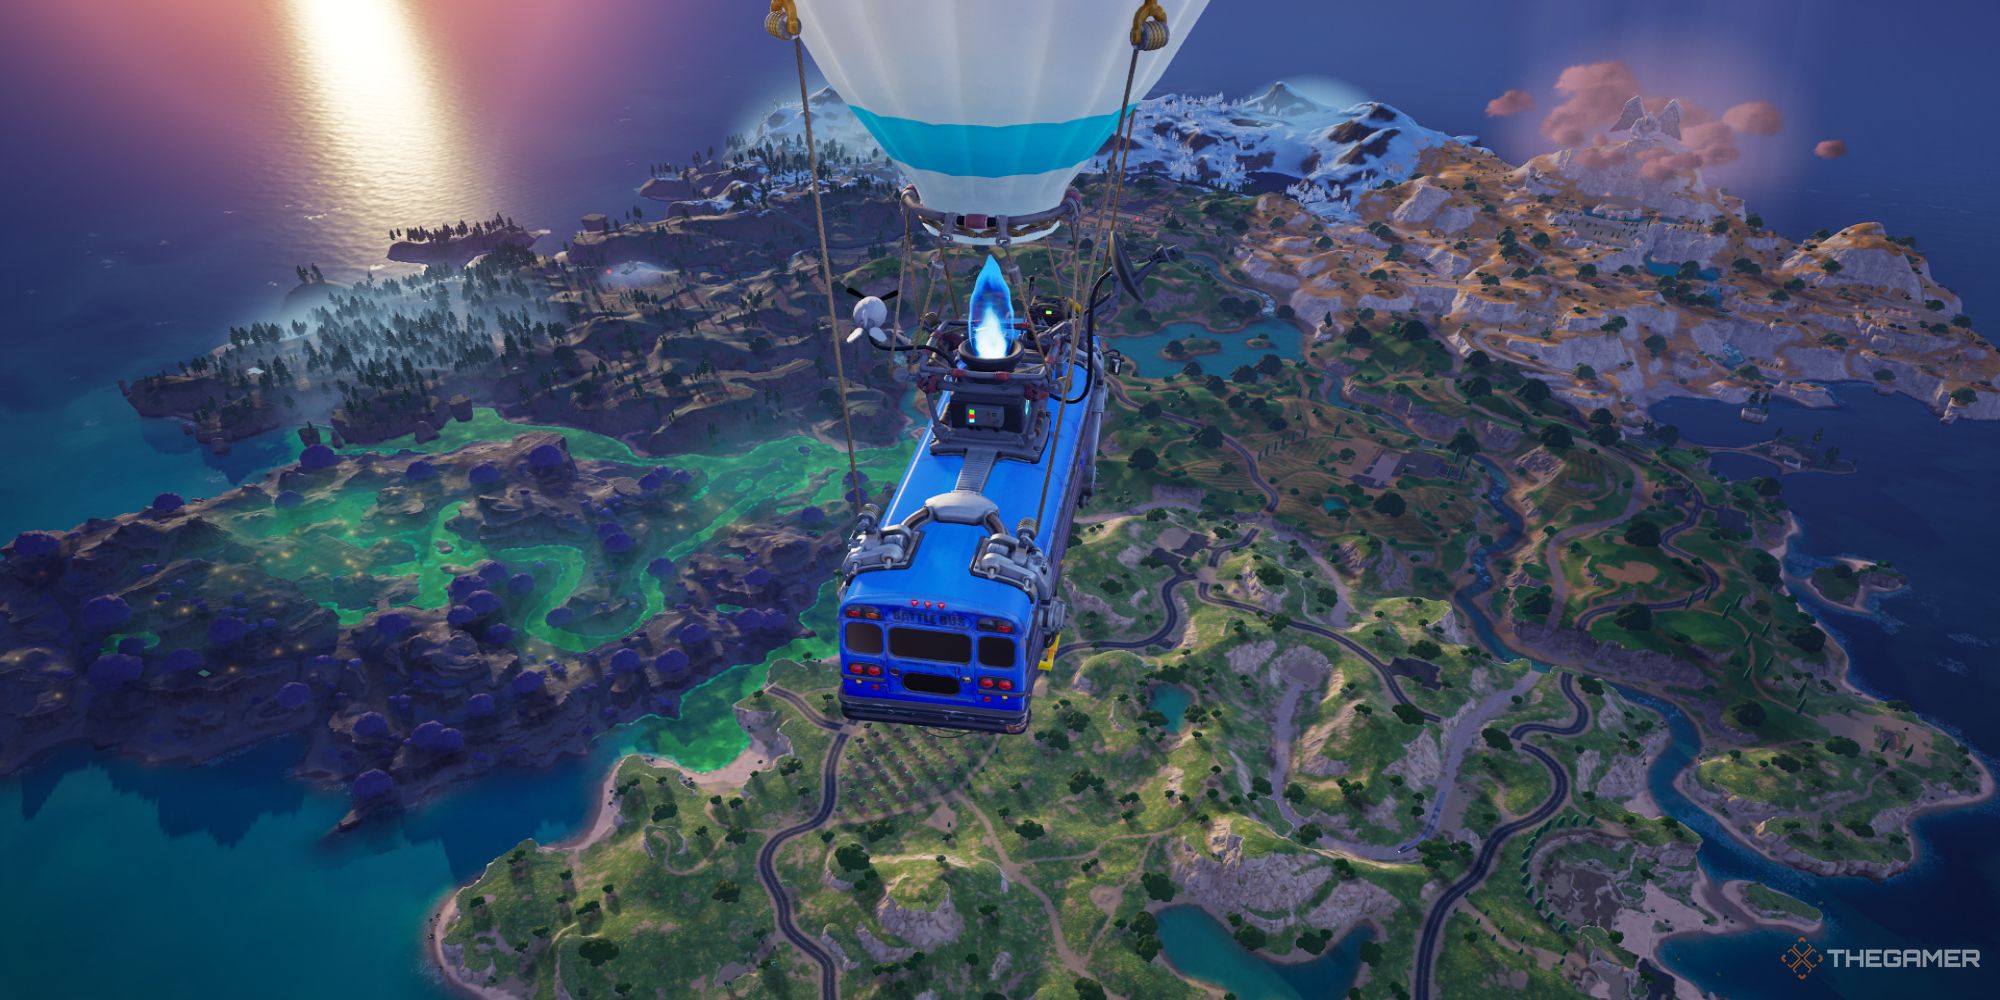 A screenshot from Fortnite showing the battle bus as it flies over the Chapter Five Season Two island, with both Mount Olympus and The Underworld visible from above.